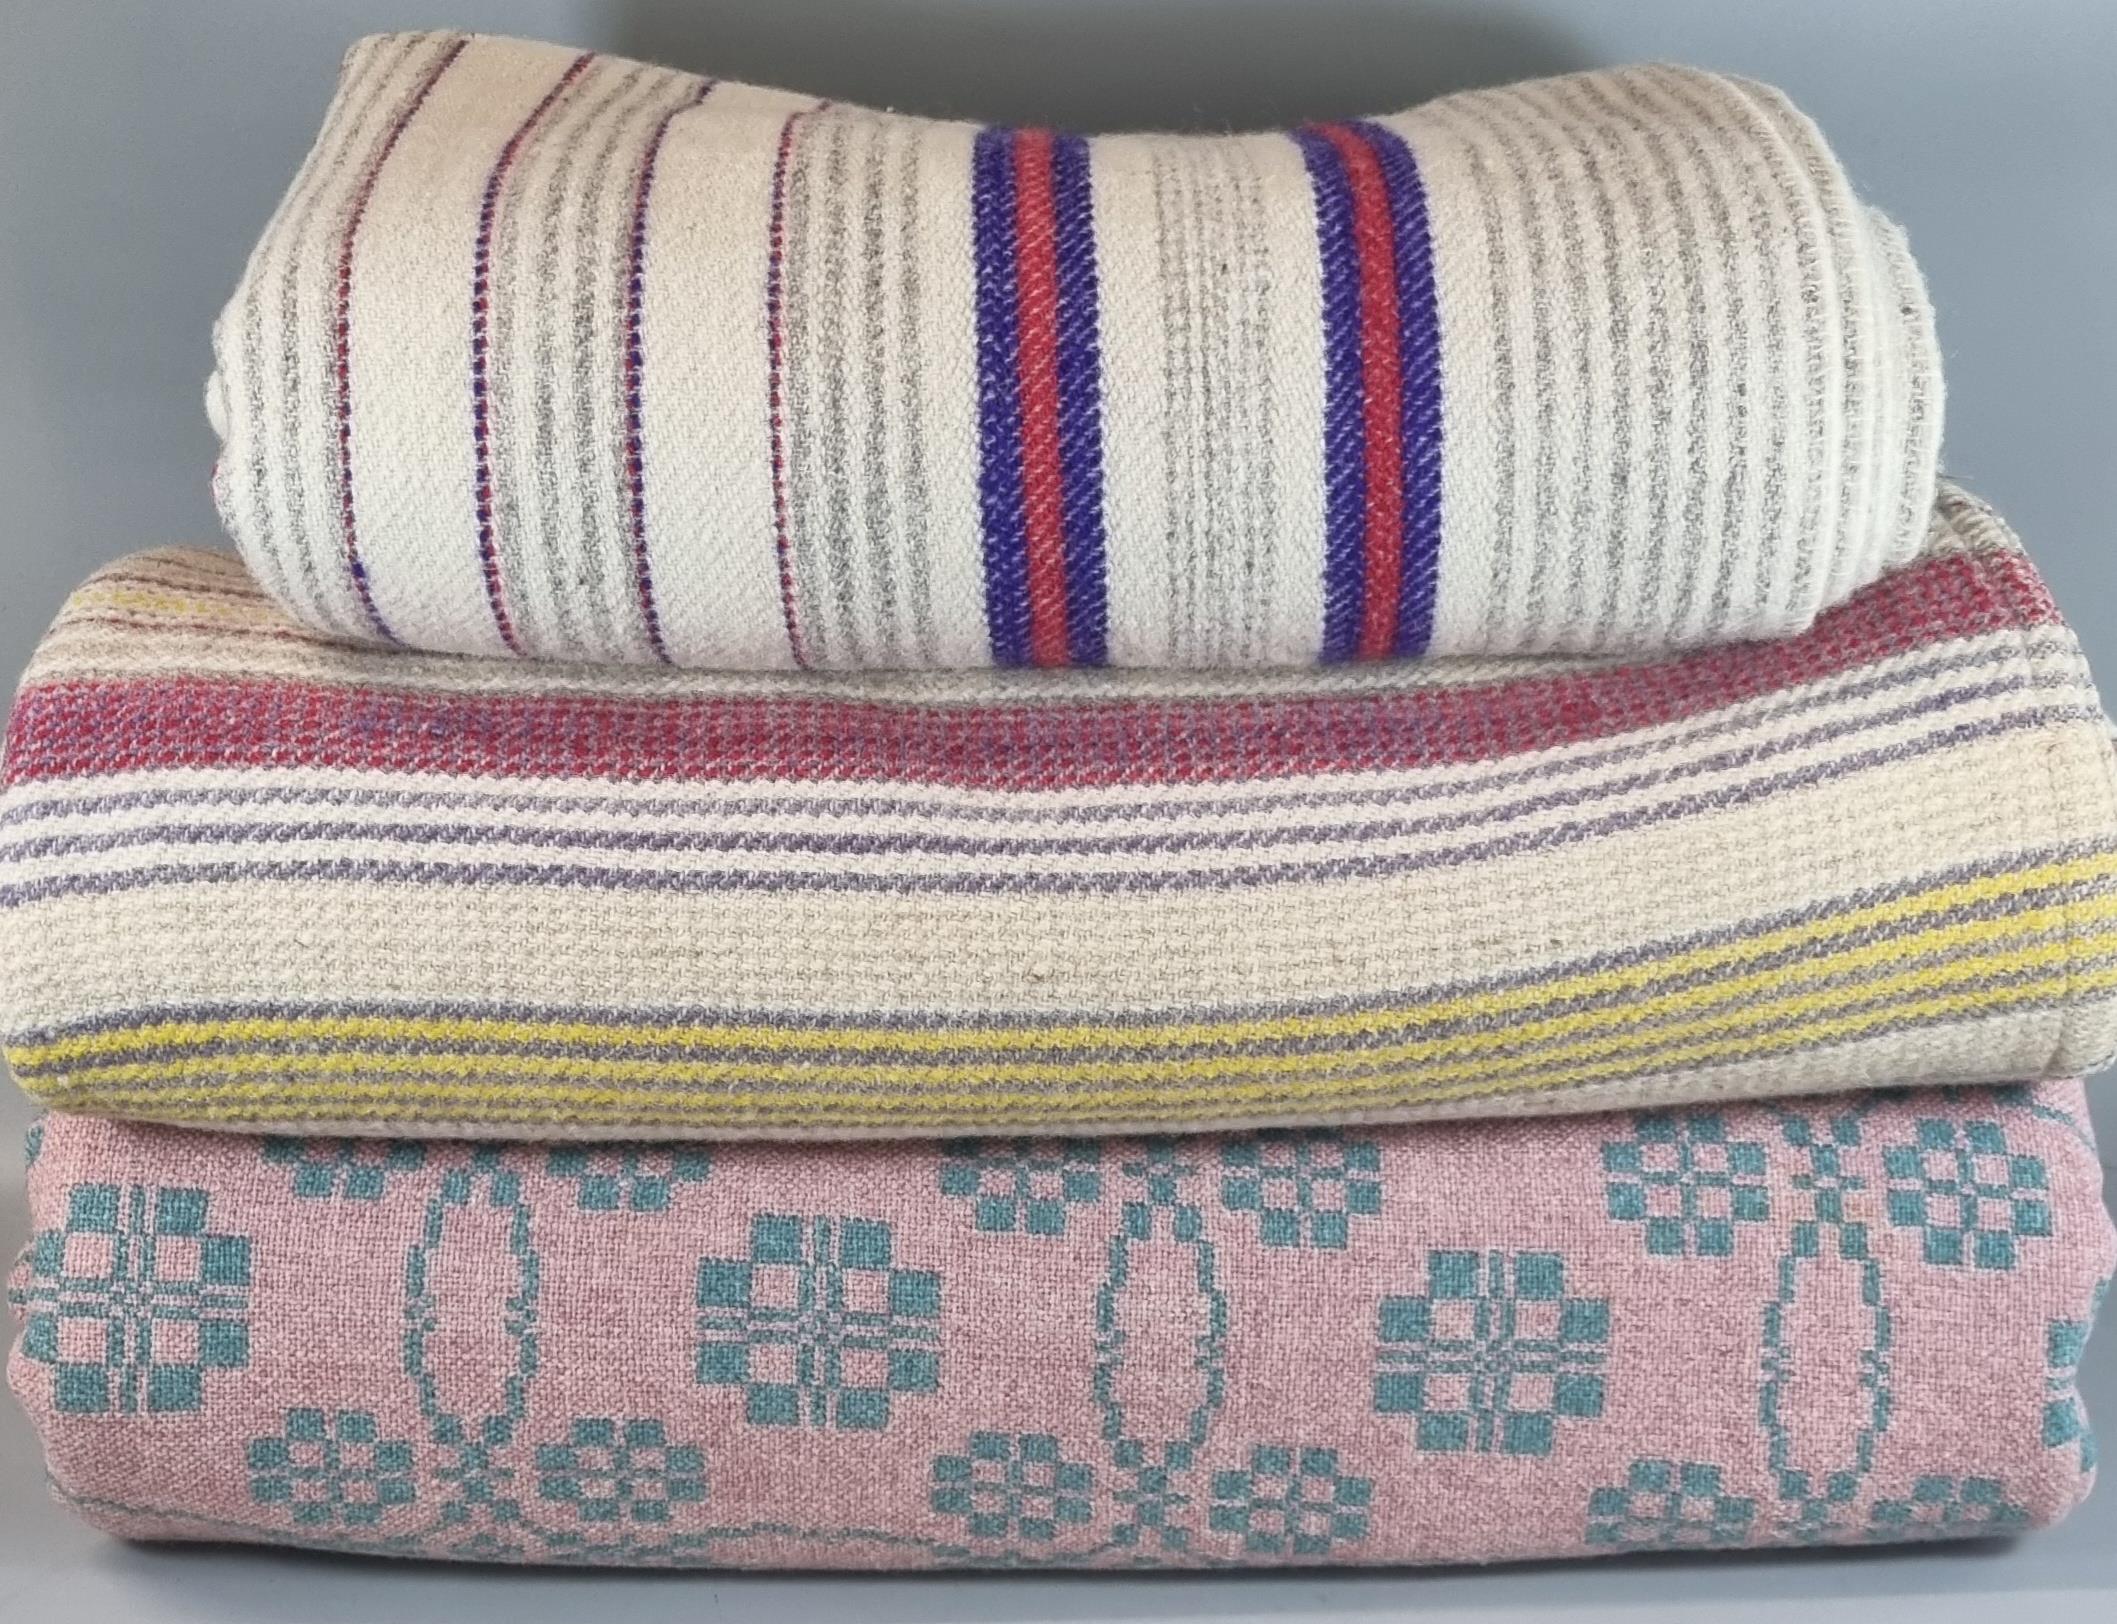 Three vintage woollen blankets or carthen to include: two striped narrow loom and a pink and cream